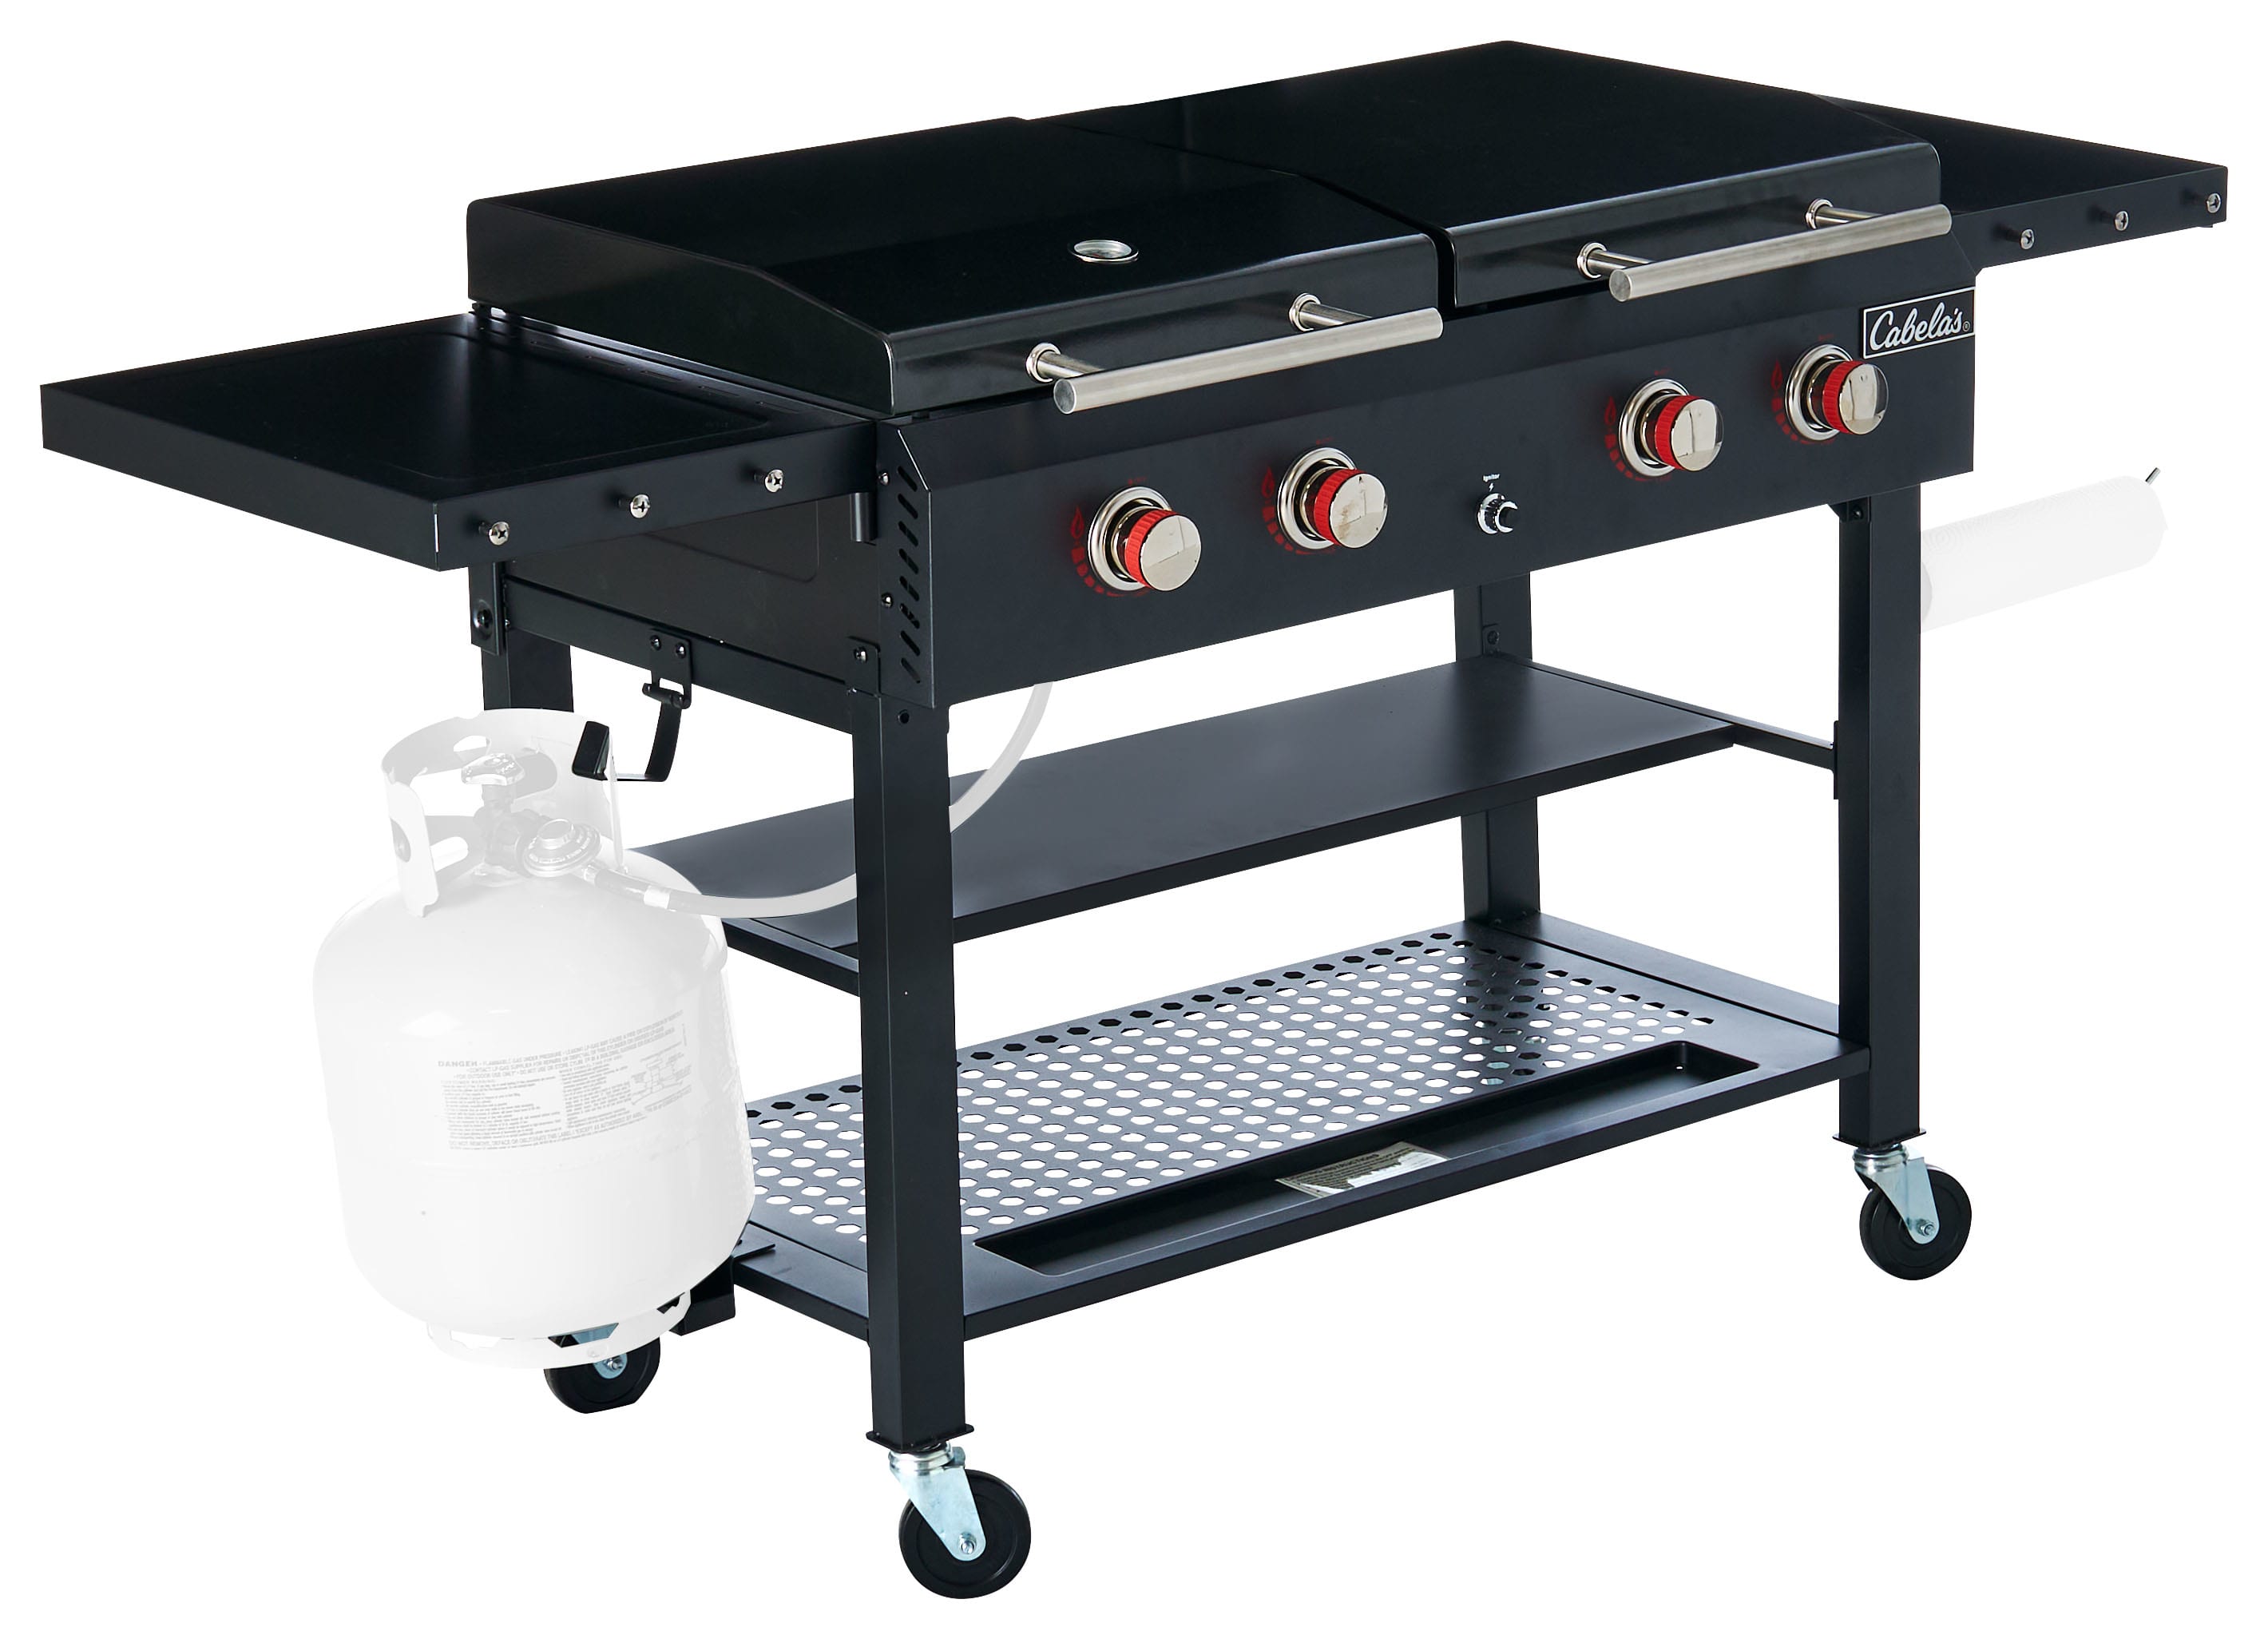 Cabela's® Deluxe 4-Burner Event Grill and Griddle Combo